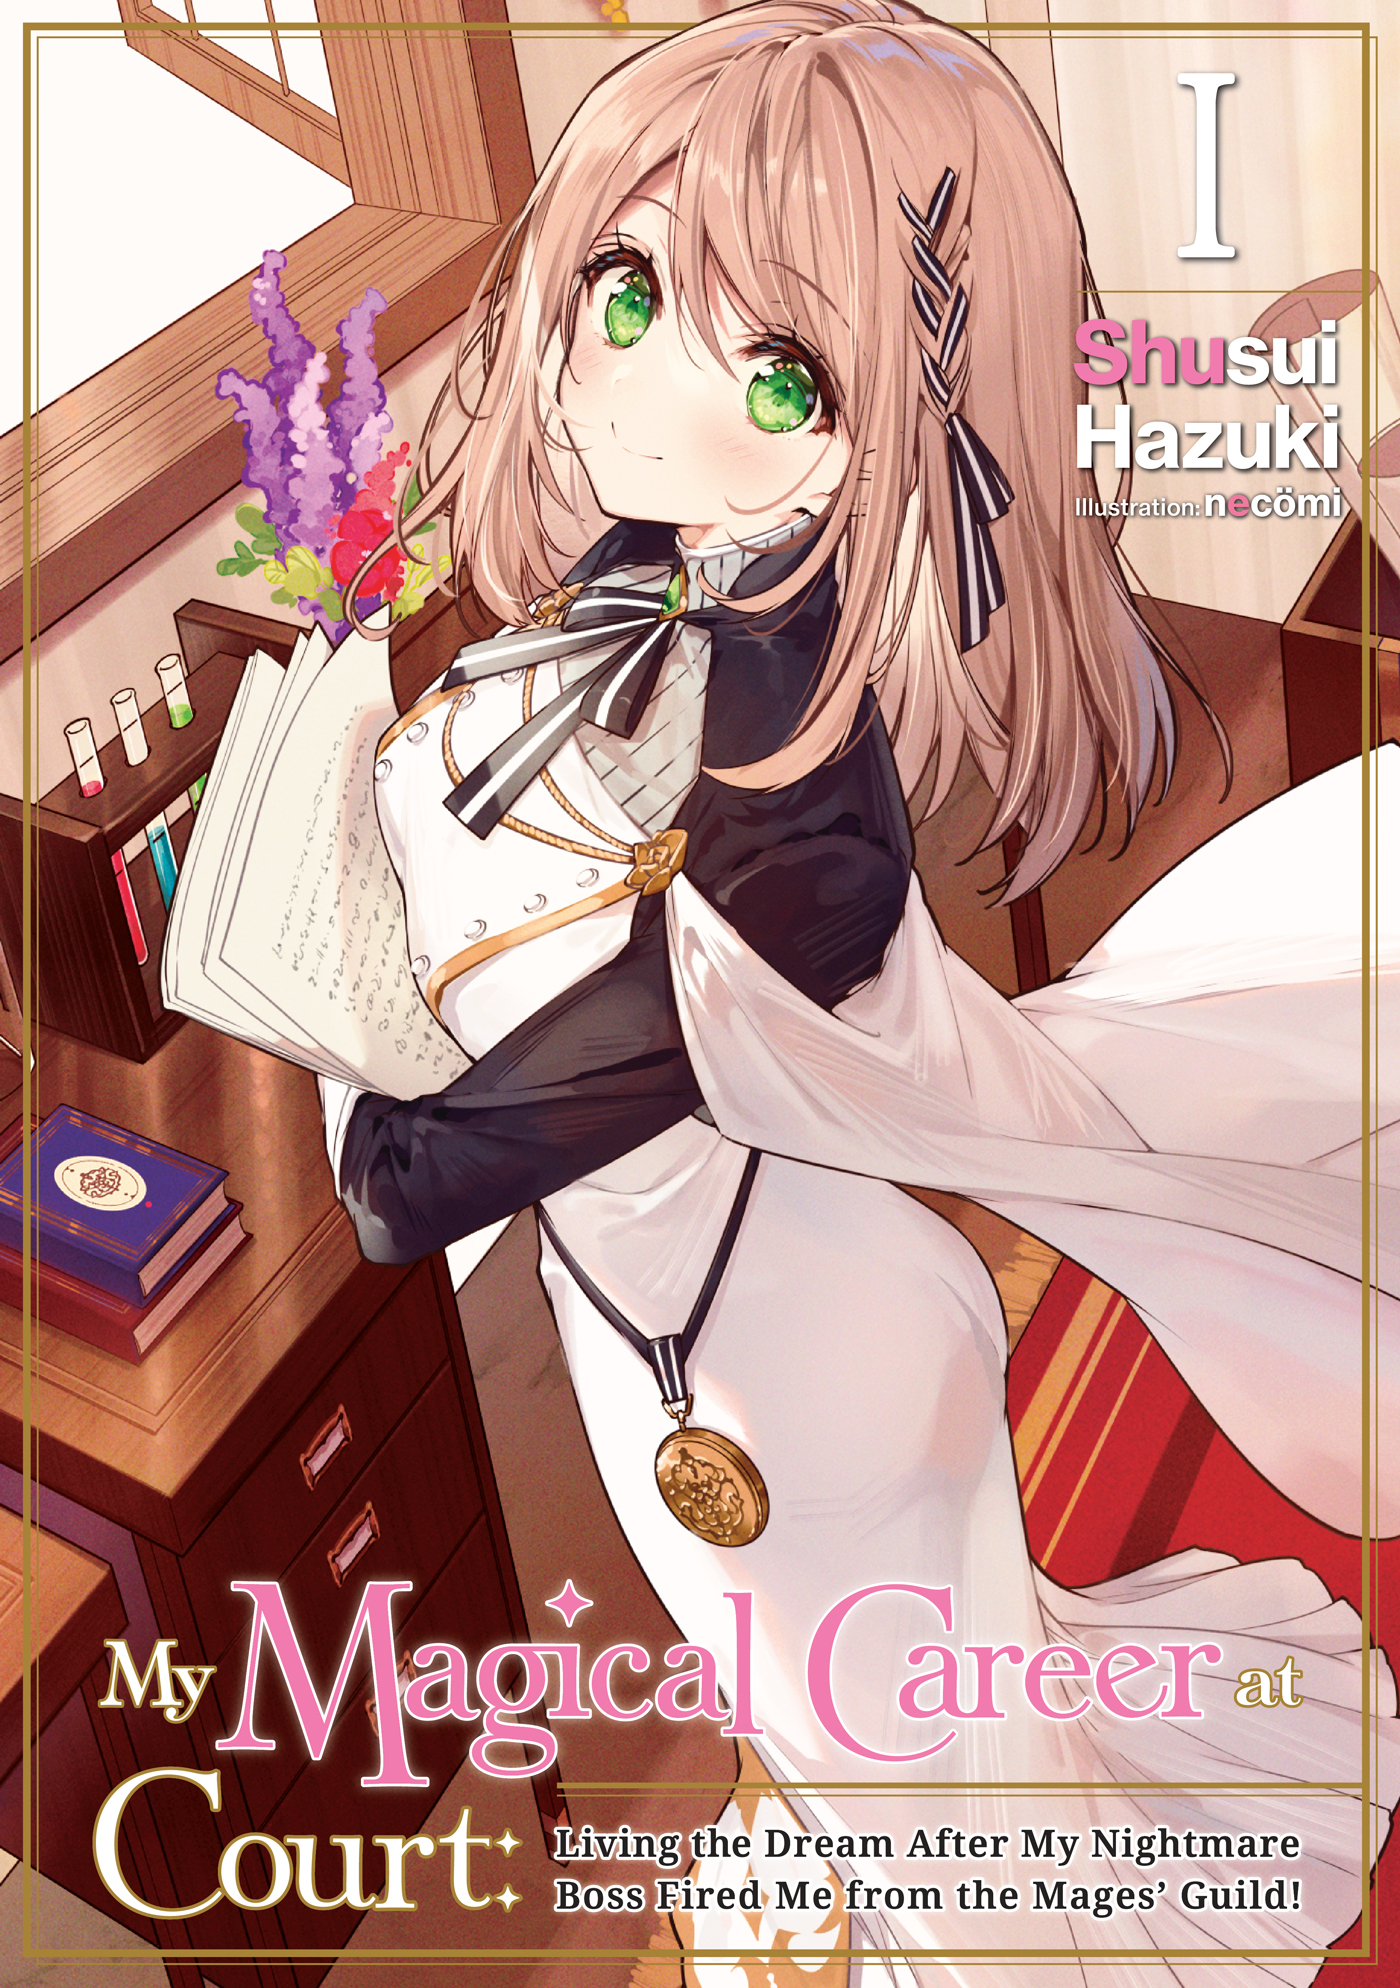 My Magical Career At Court: Living the Dream After My Nightmare Boss Fired Me from the Mages’ Guild! by Shusui Hazuki (Story), necömi (Illustrations)